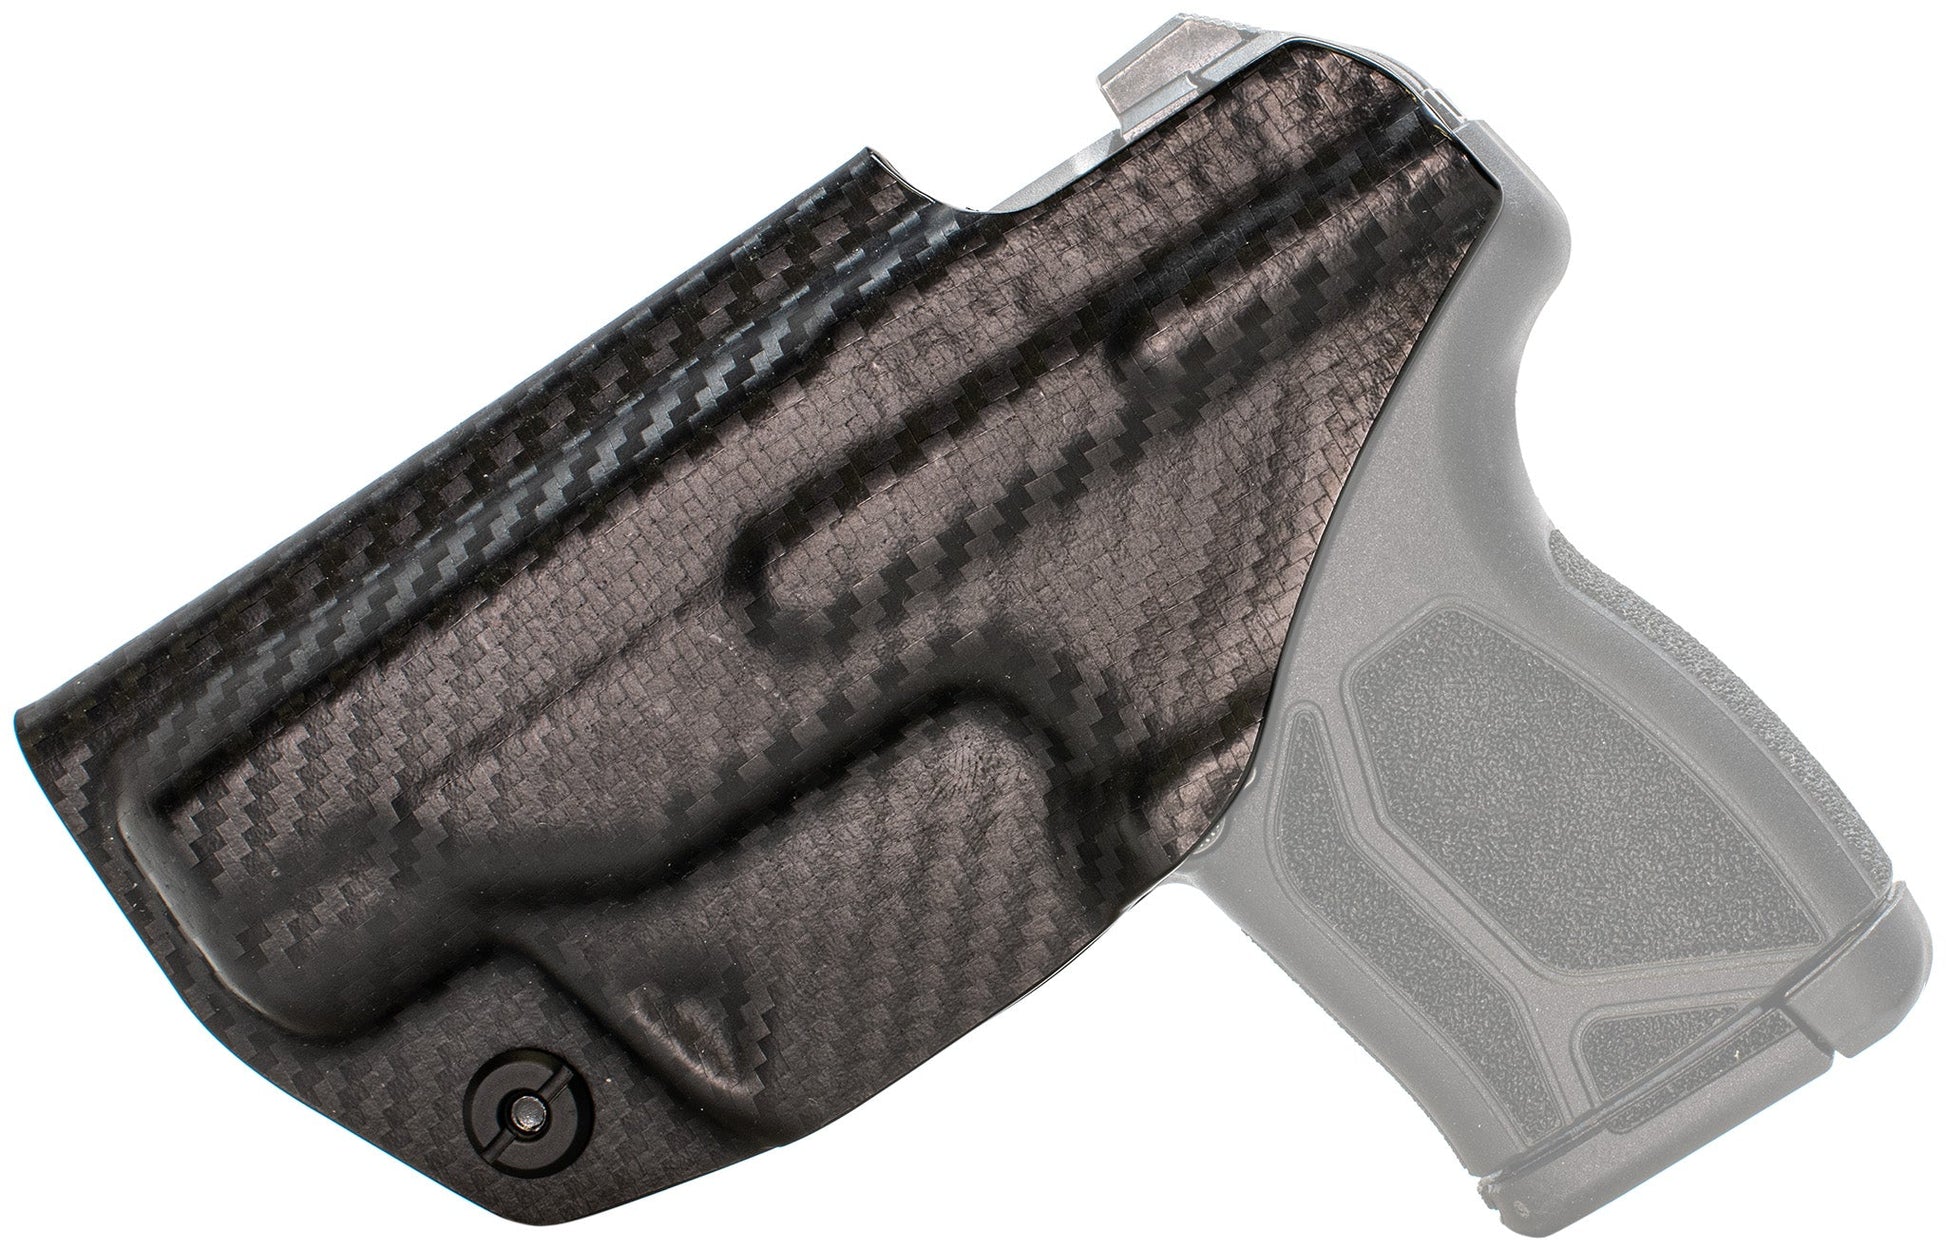 Ruger LCP Max Holster CYA Supply Co.